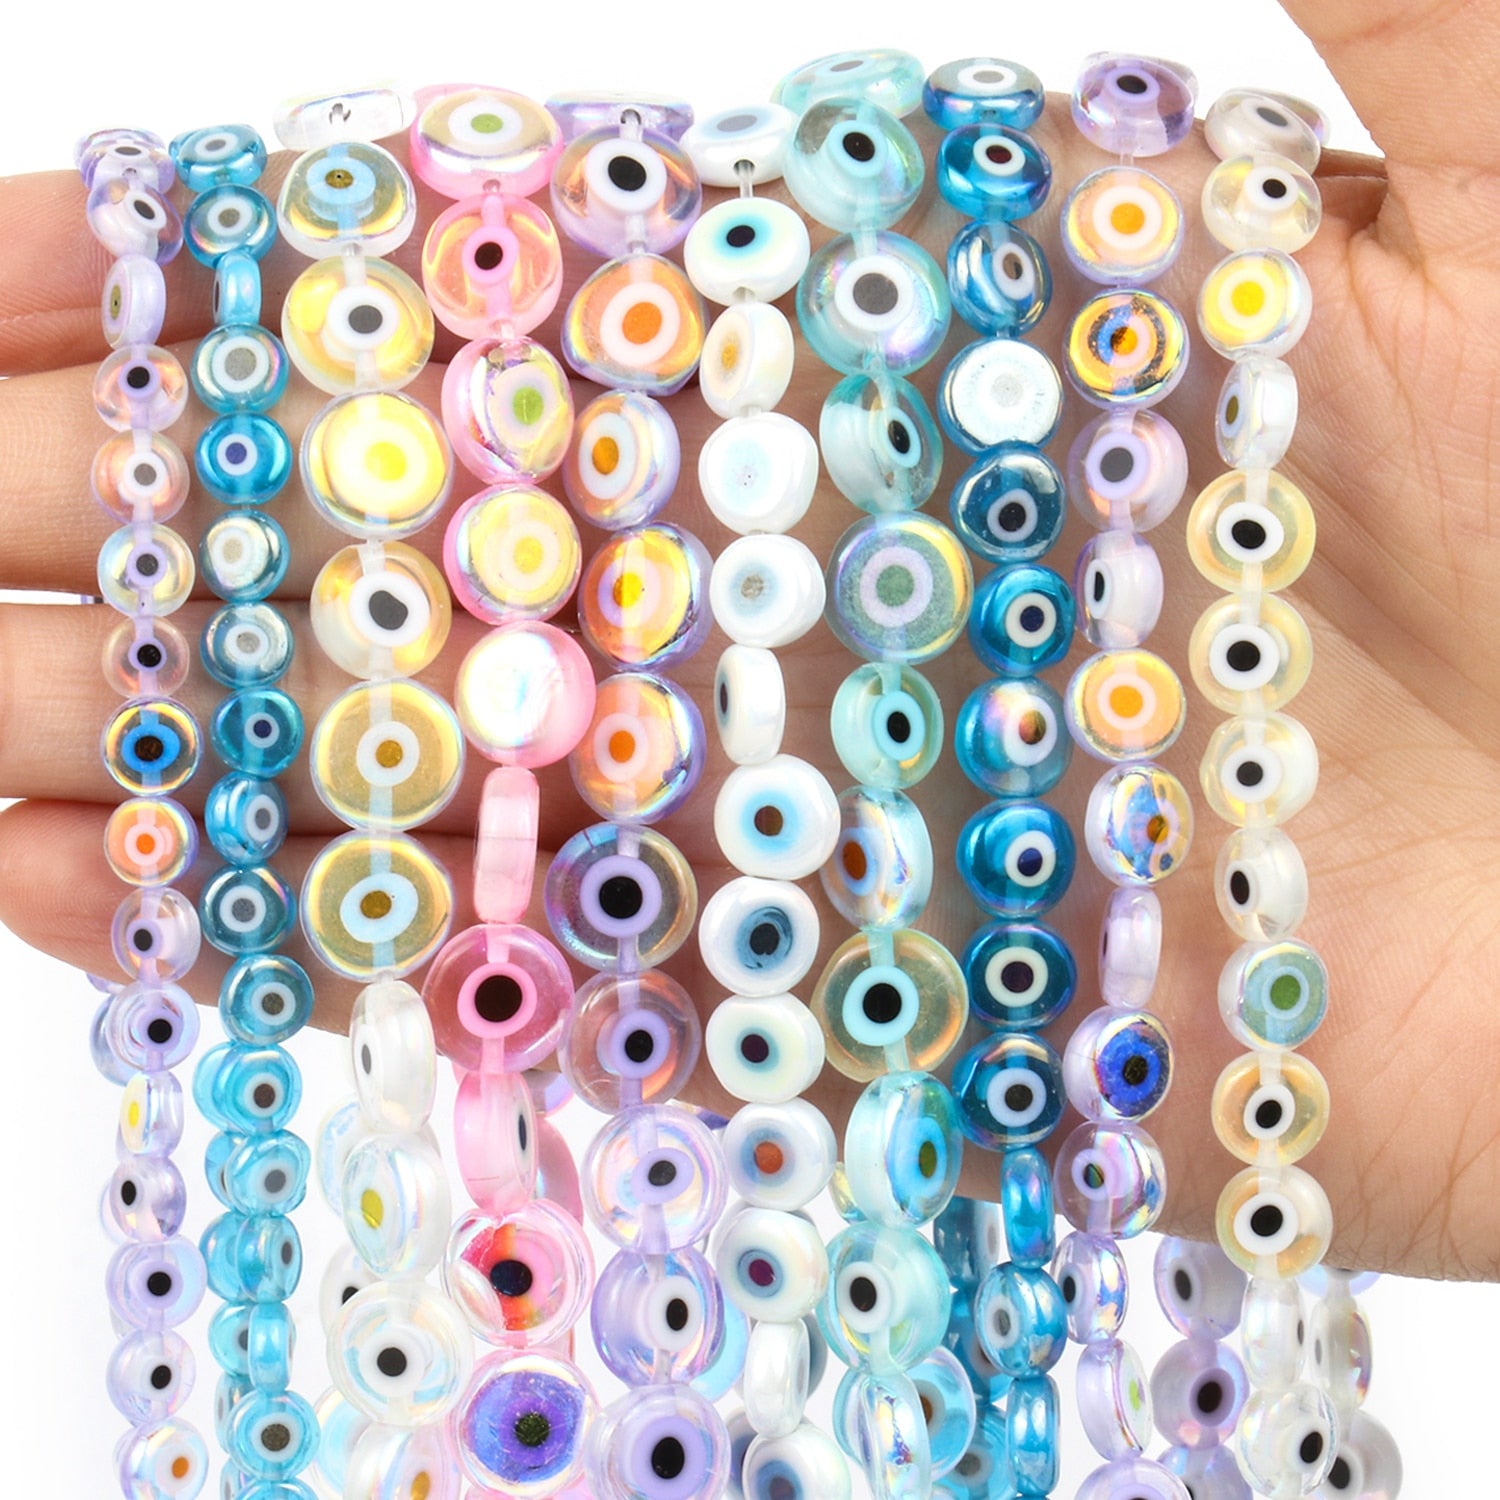 Handcrafted Jewelry Beads